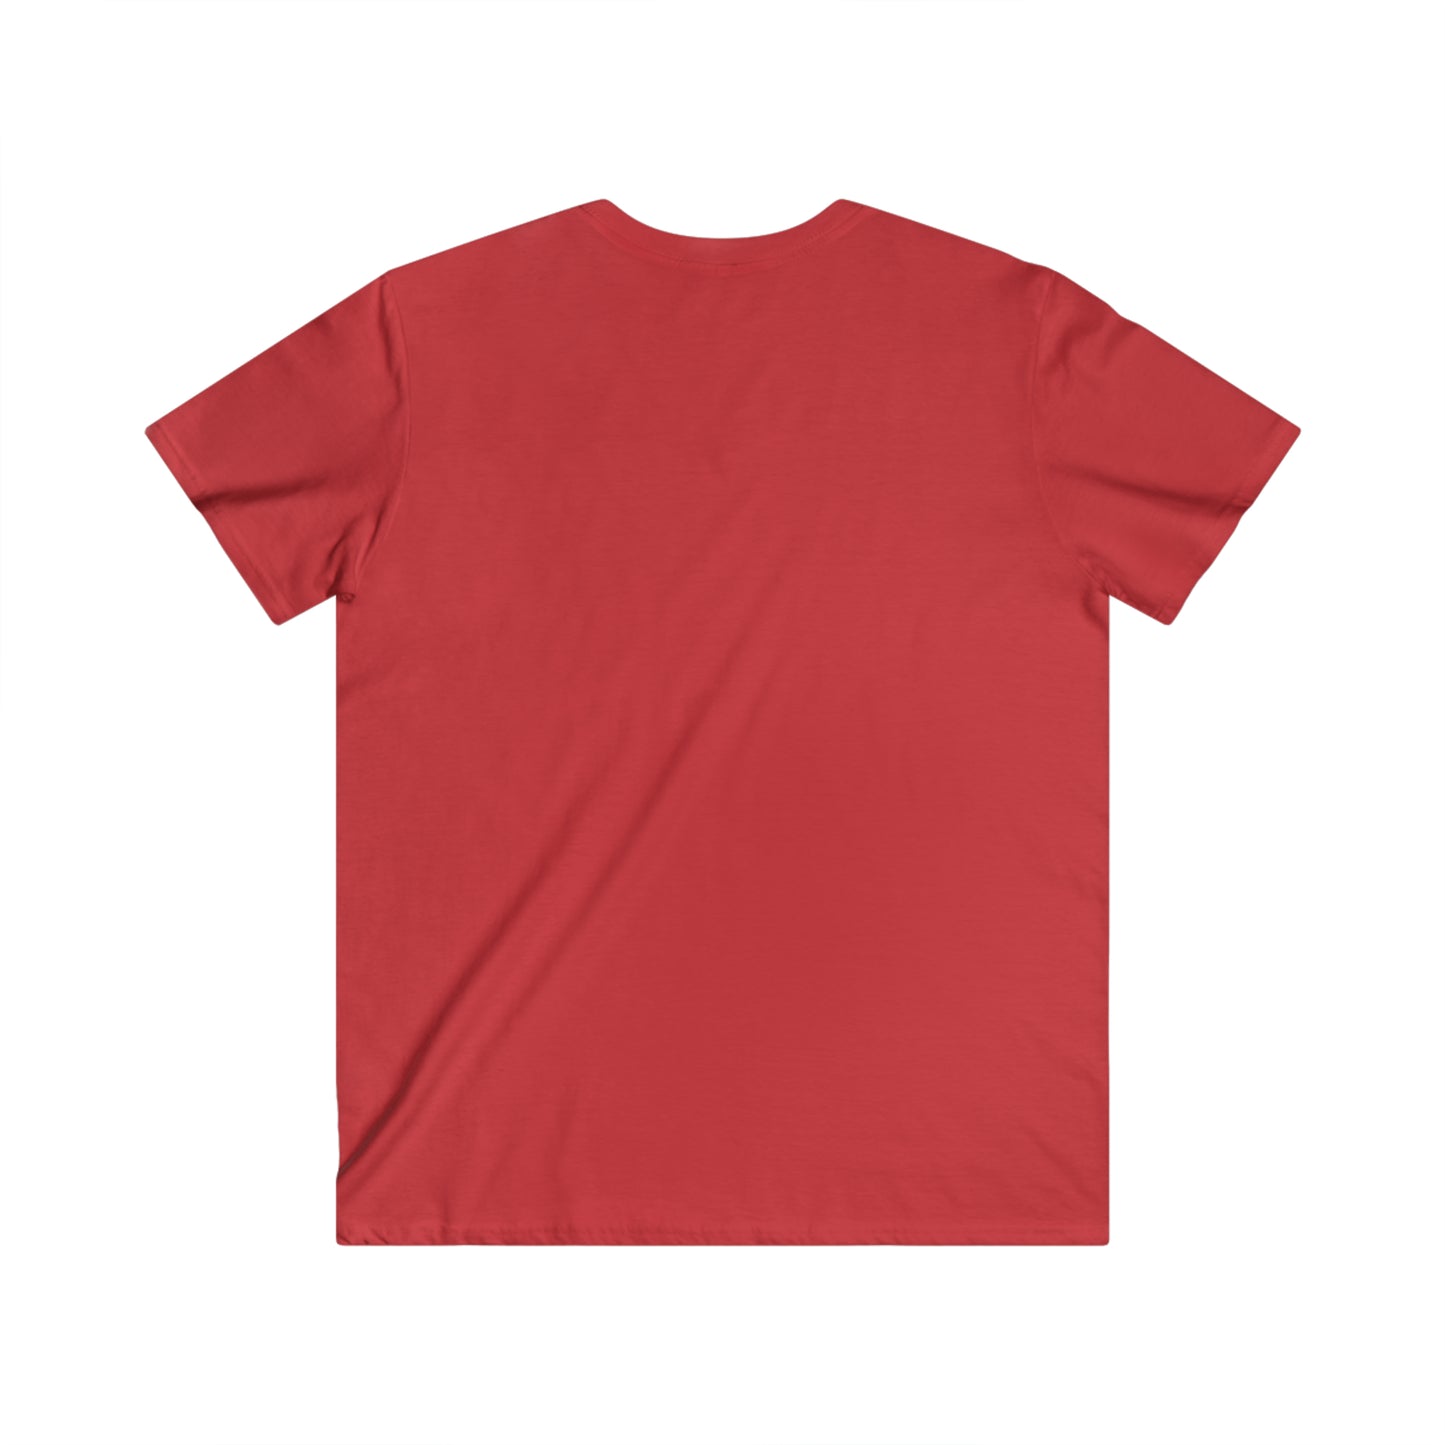 The Party Men's Fitted V-Neck Short Sleeve Tee - The Party Store